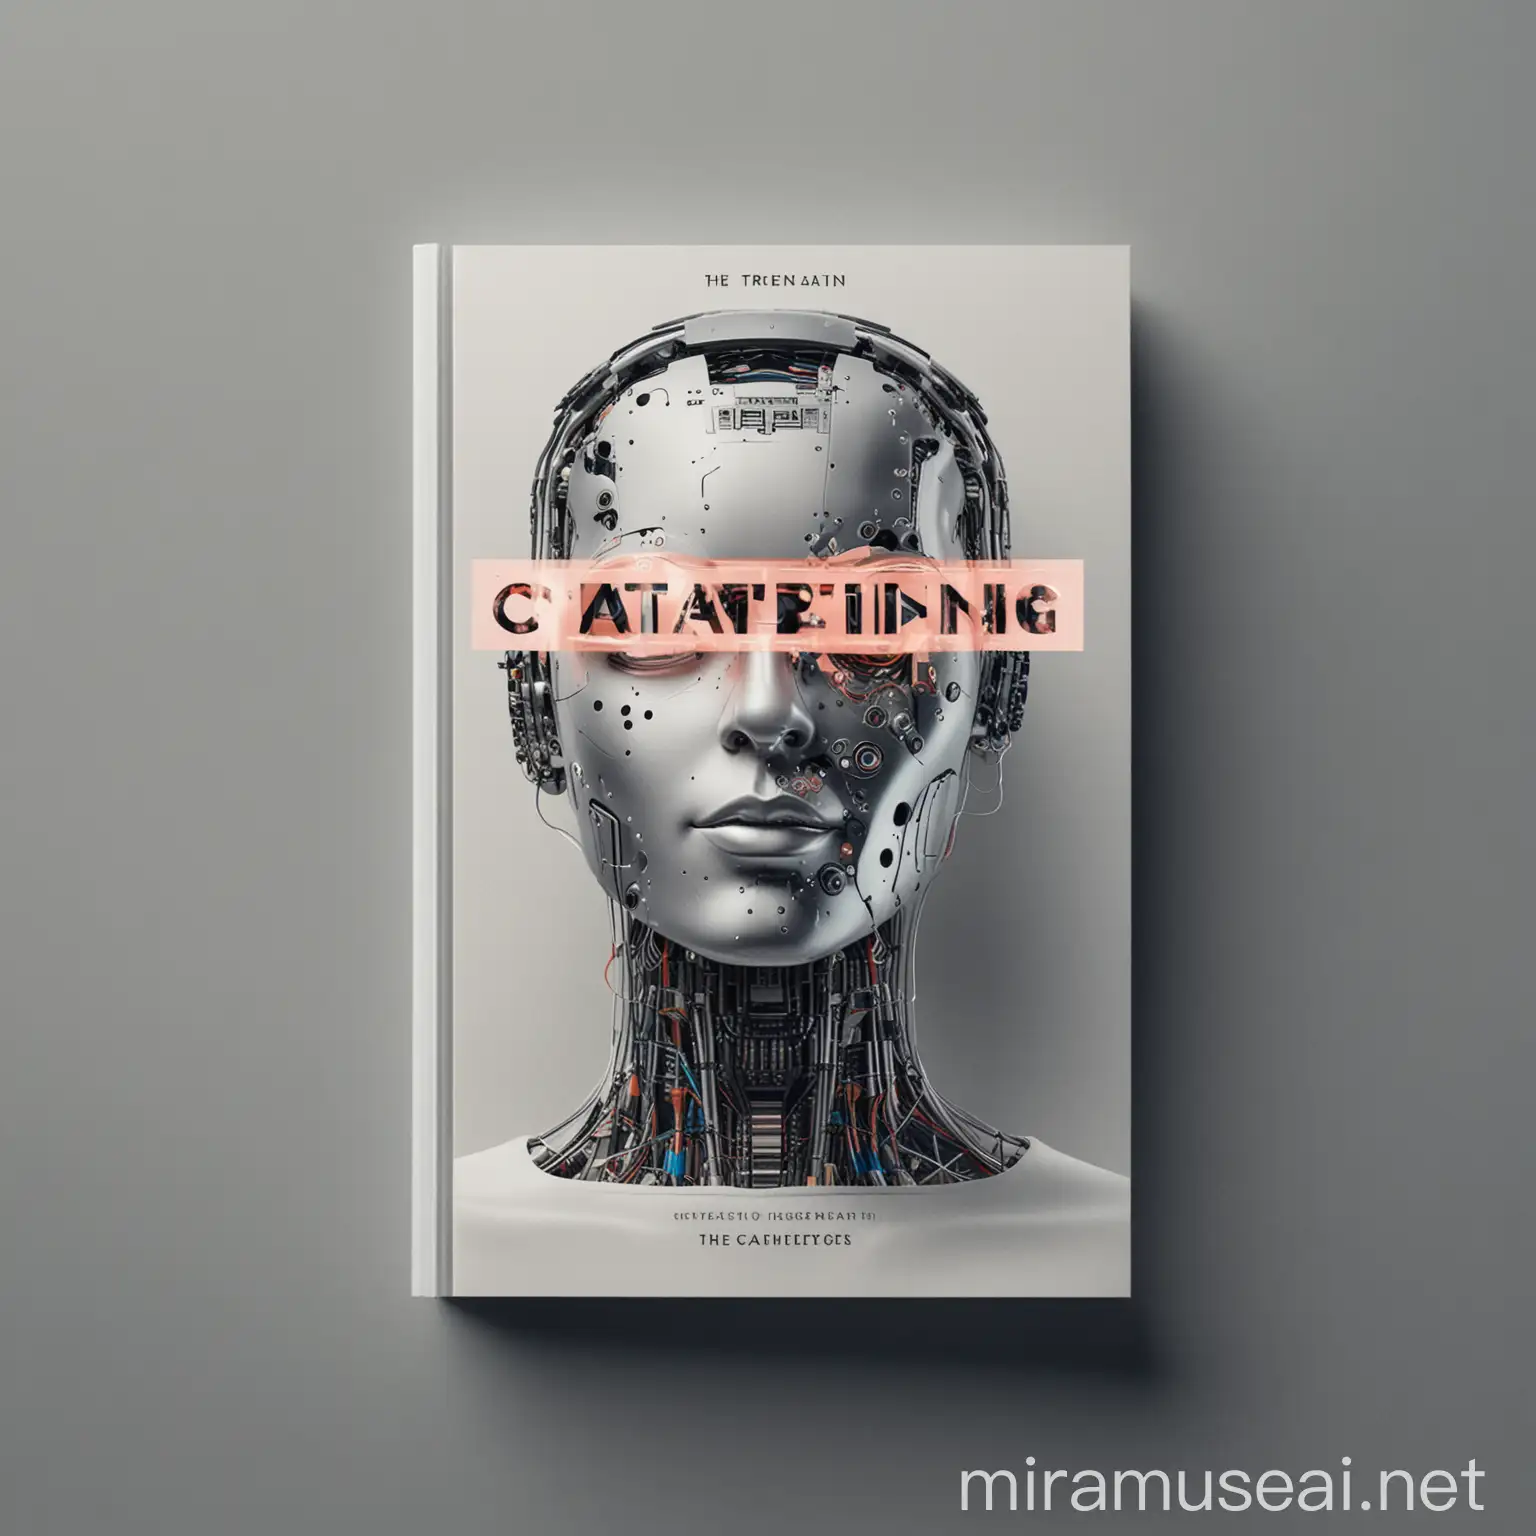 captivating trend book cover photo, the trend book is about ai advertising, simple, tech